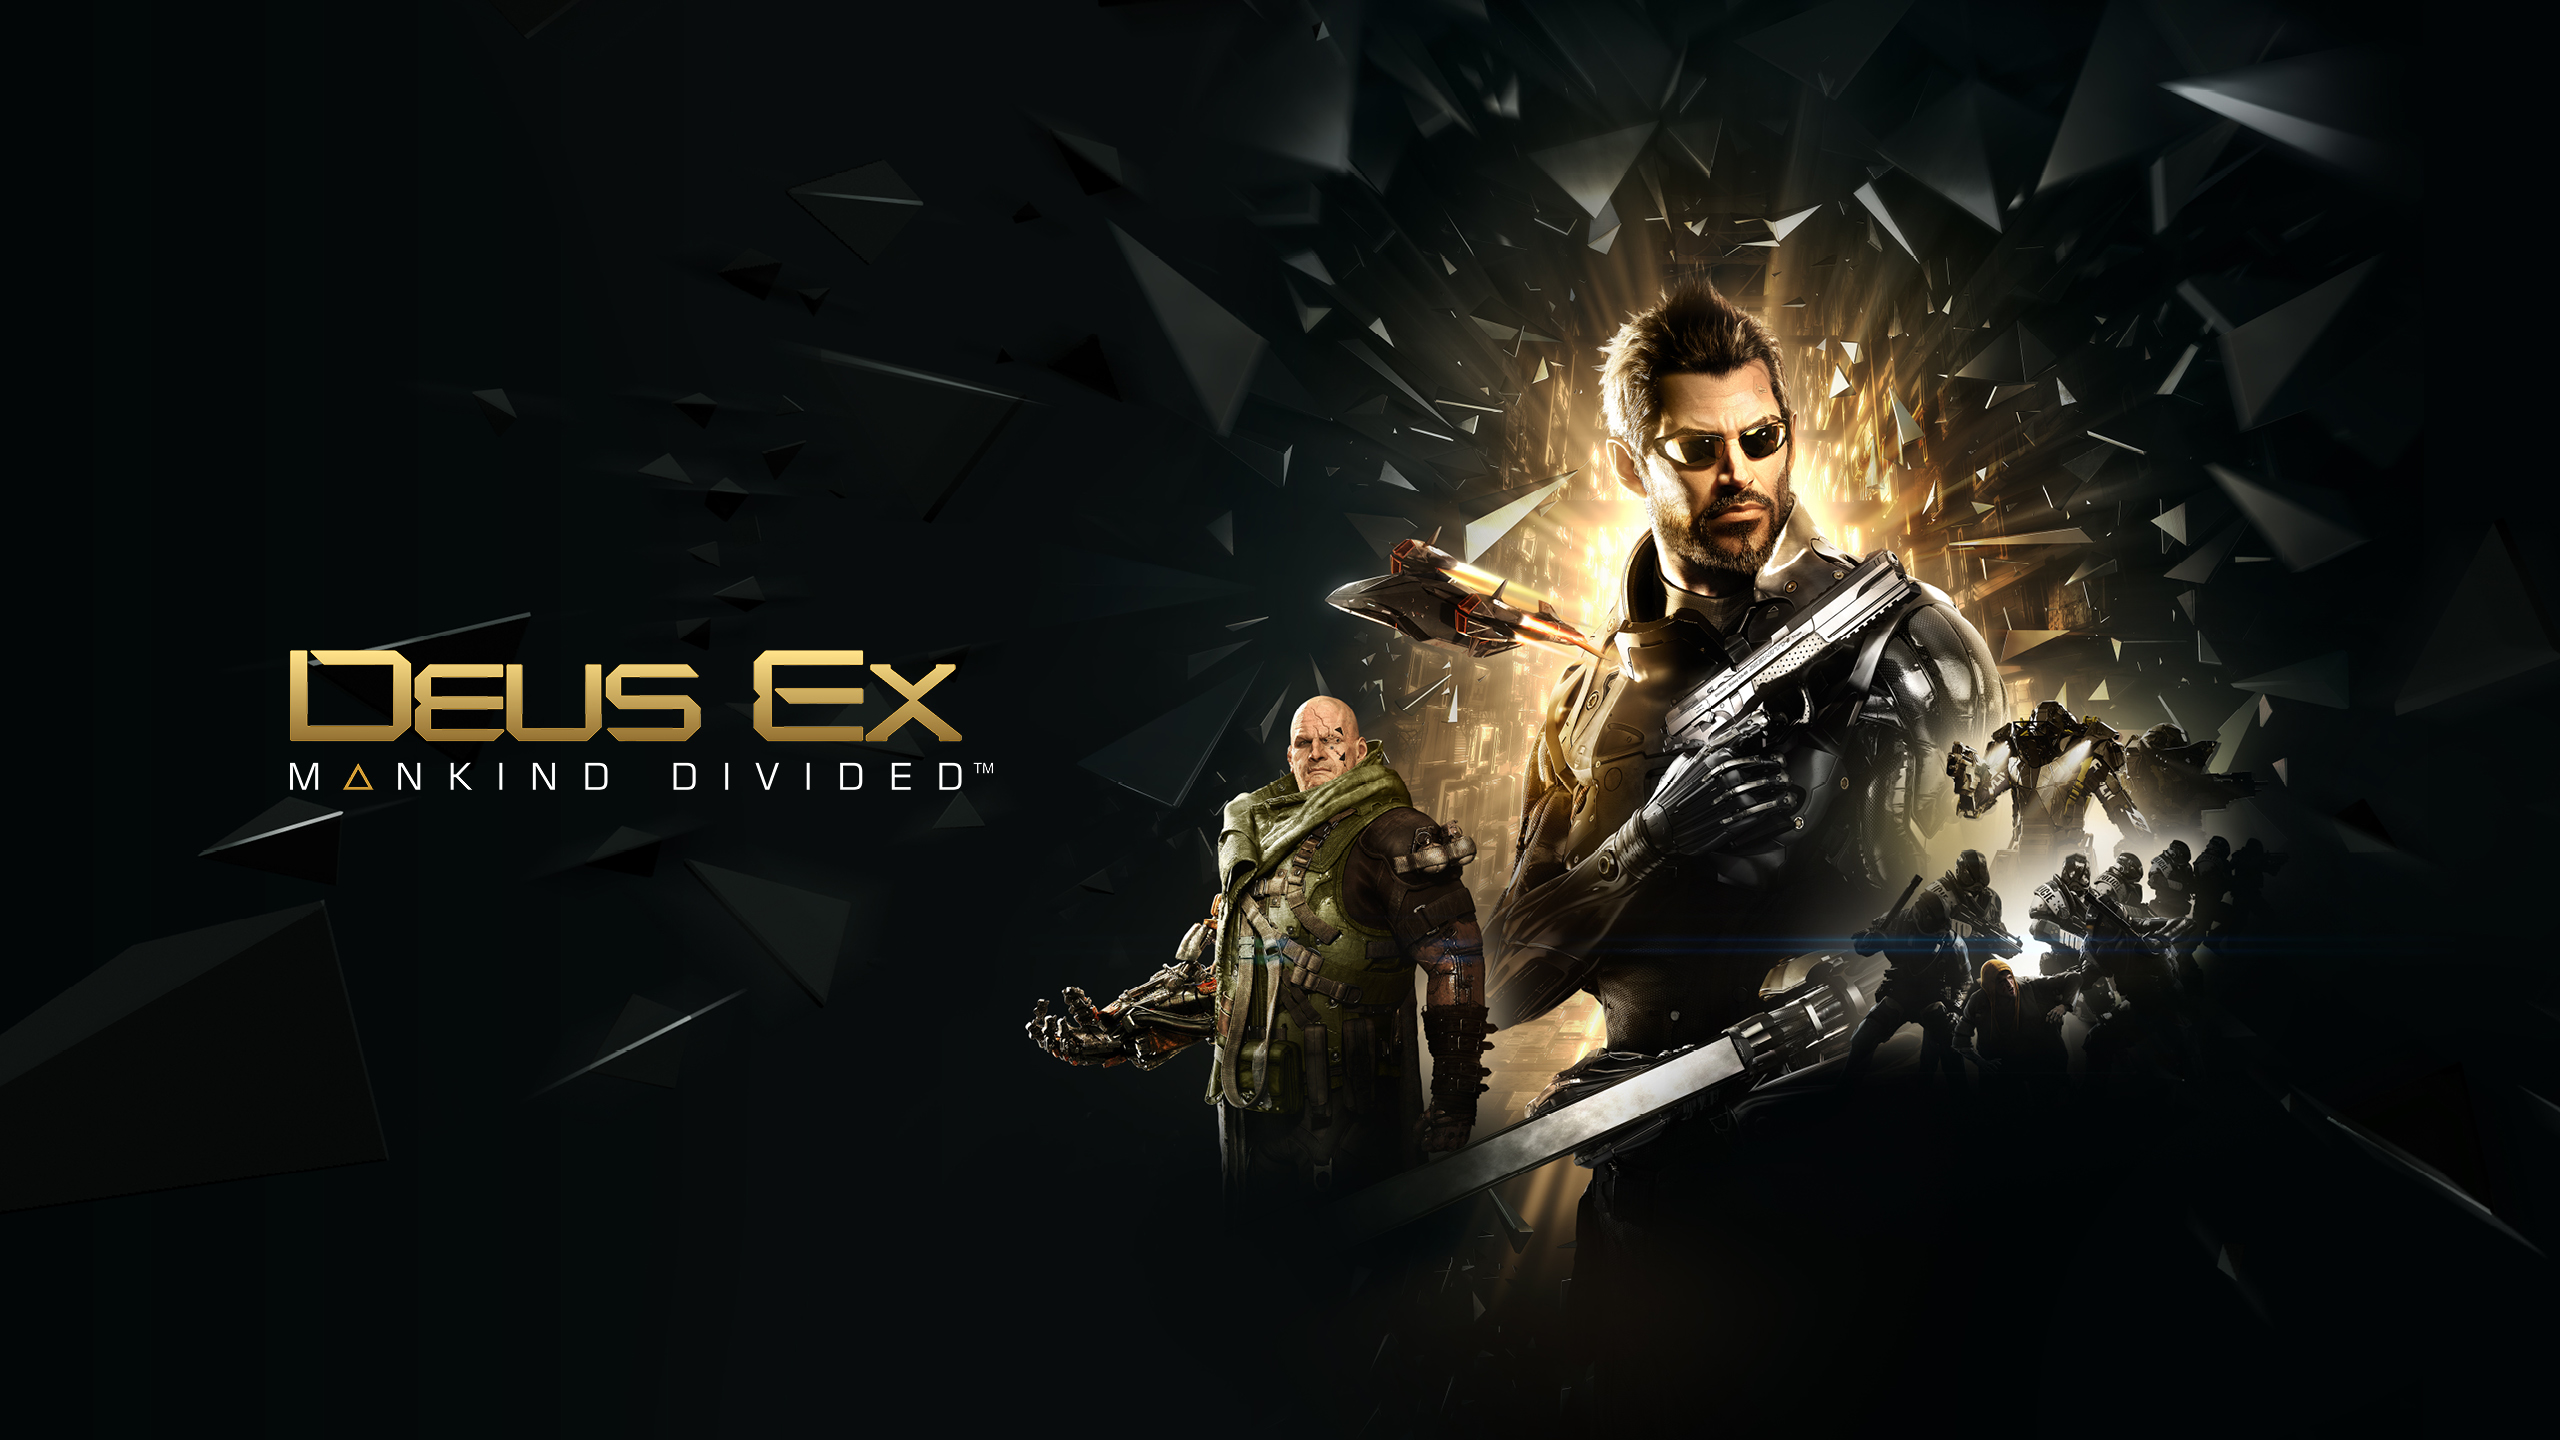 The game Deus Ex: Mankind Divided wallpaper for download